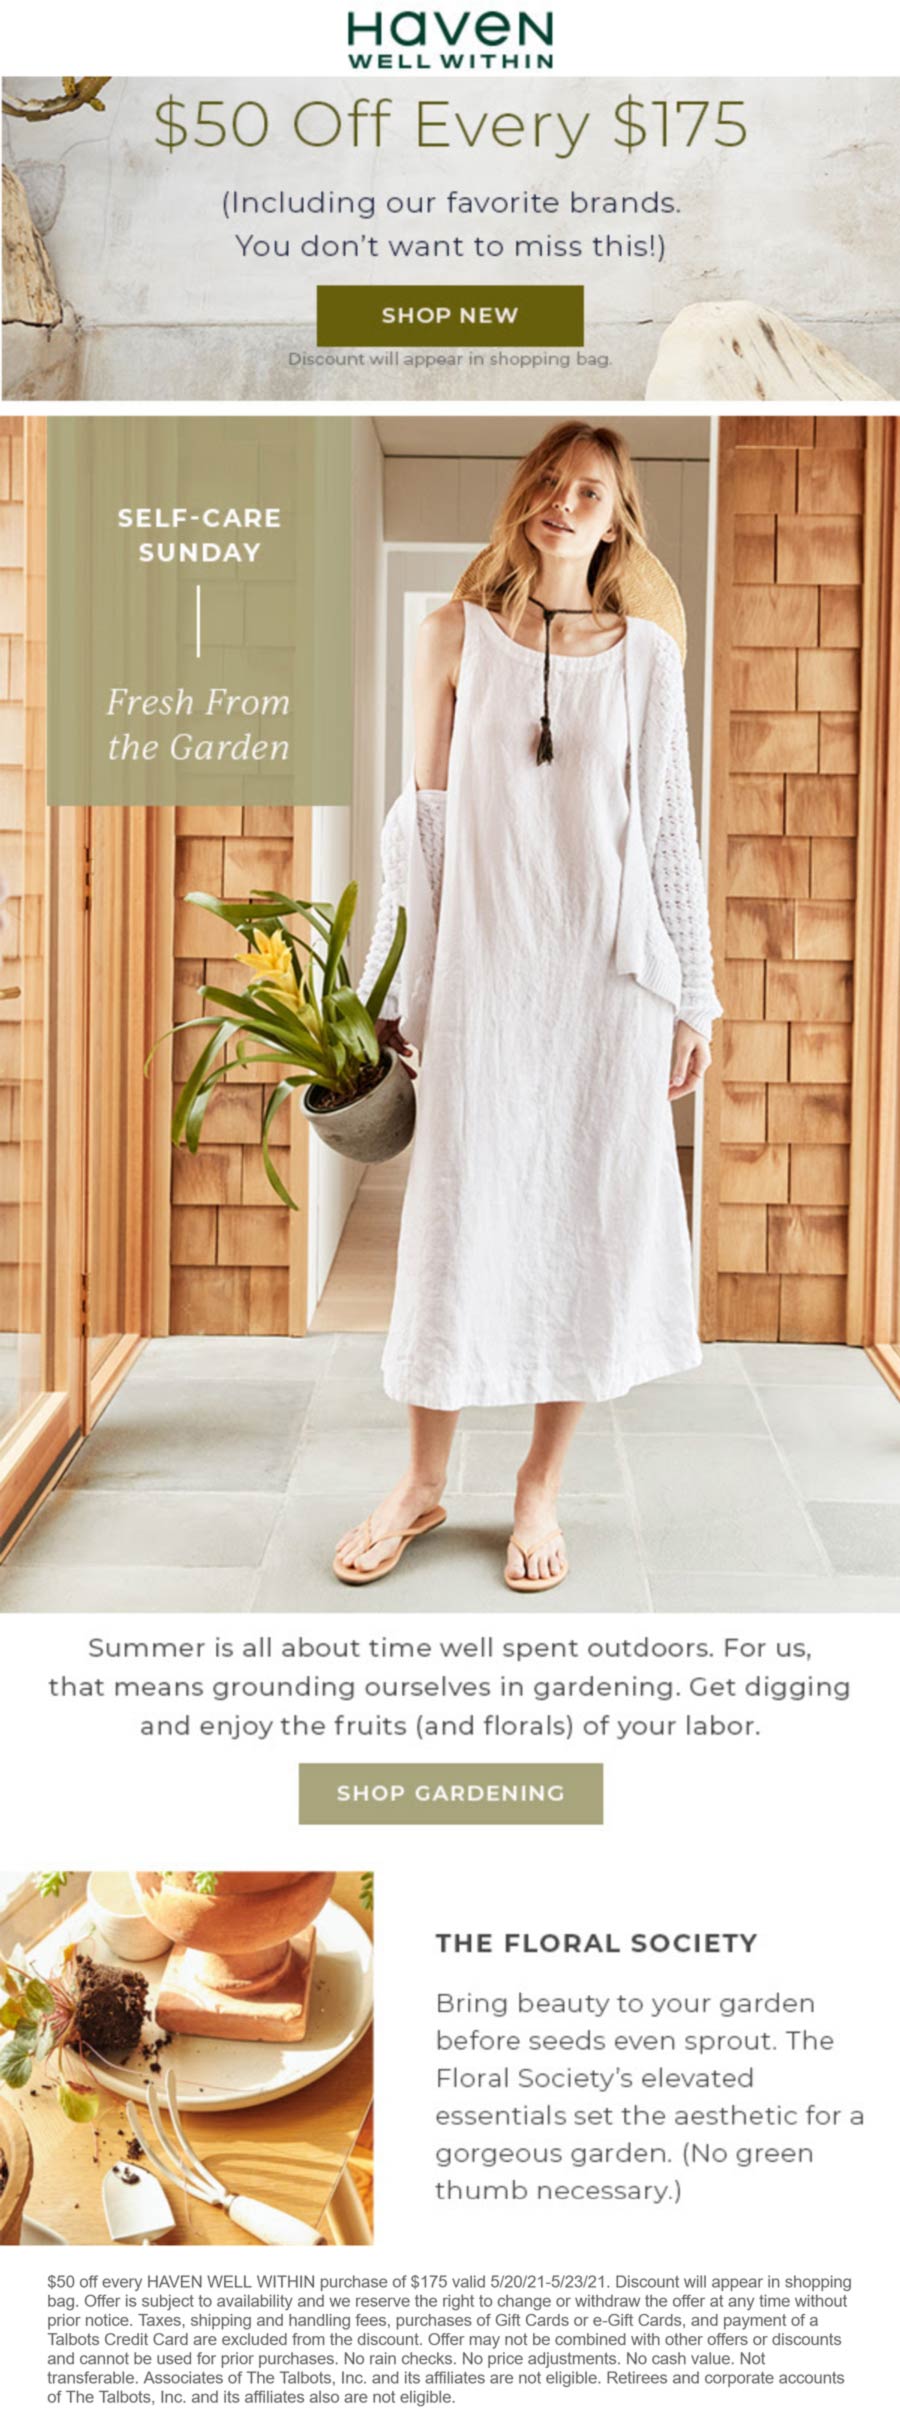 Haven Well Within stores Coupon  $50 off every $175 today at Haven Well Within #havenwellwithin 